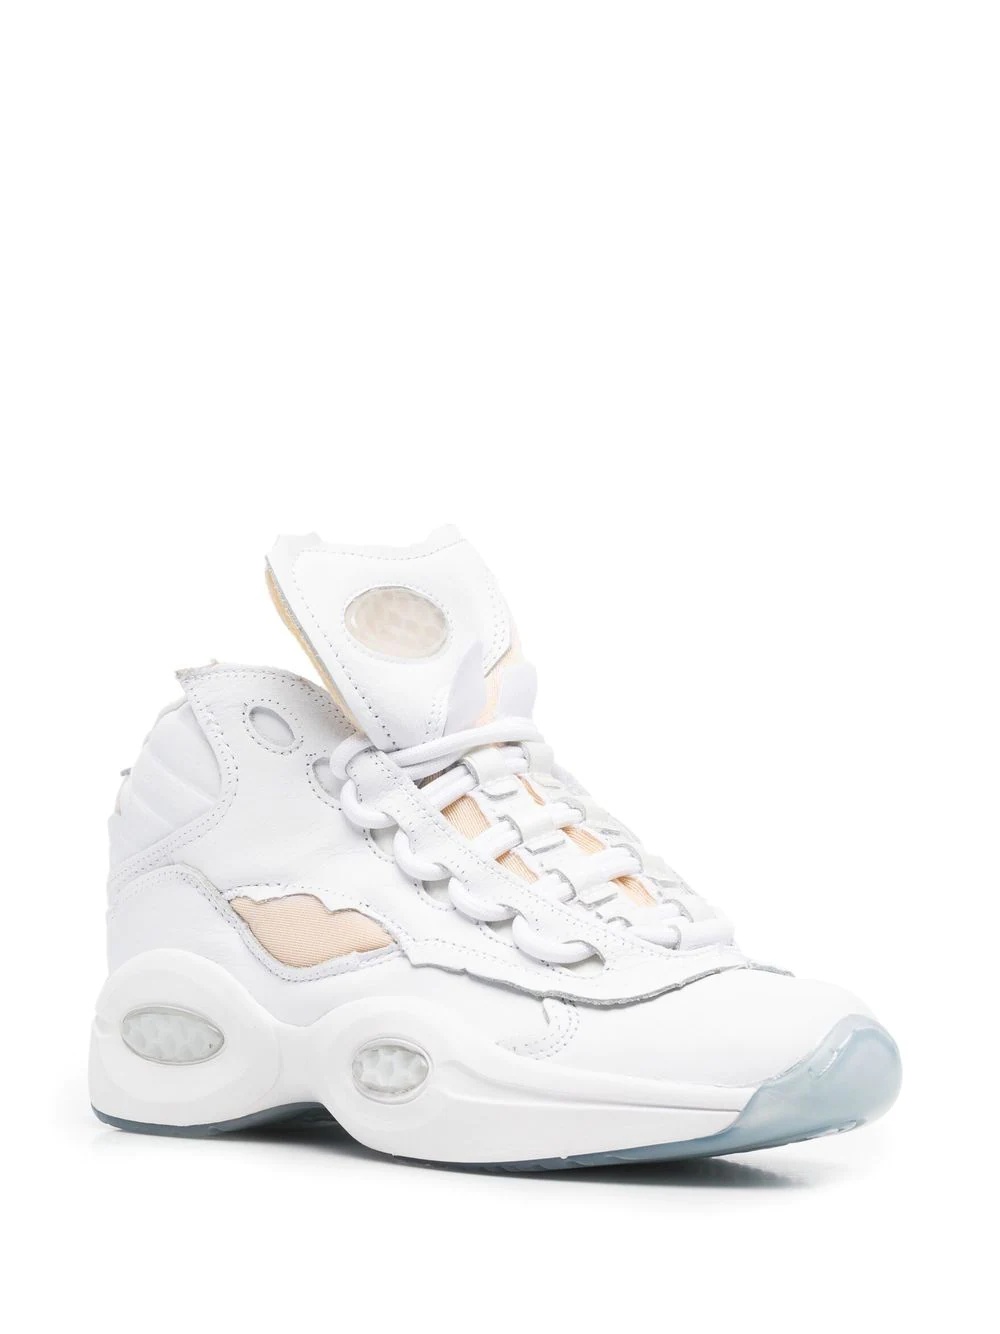 x Maison Margiela Question Mid Memory Of sneakers - 2